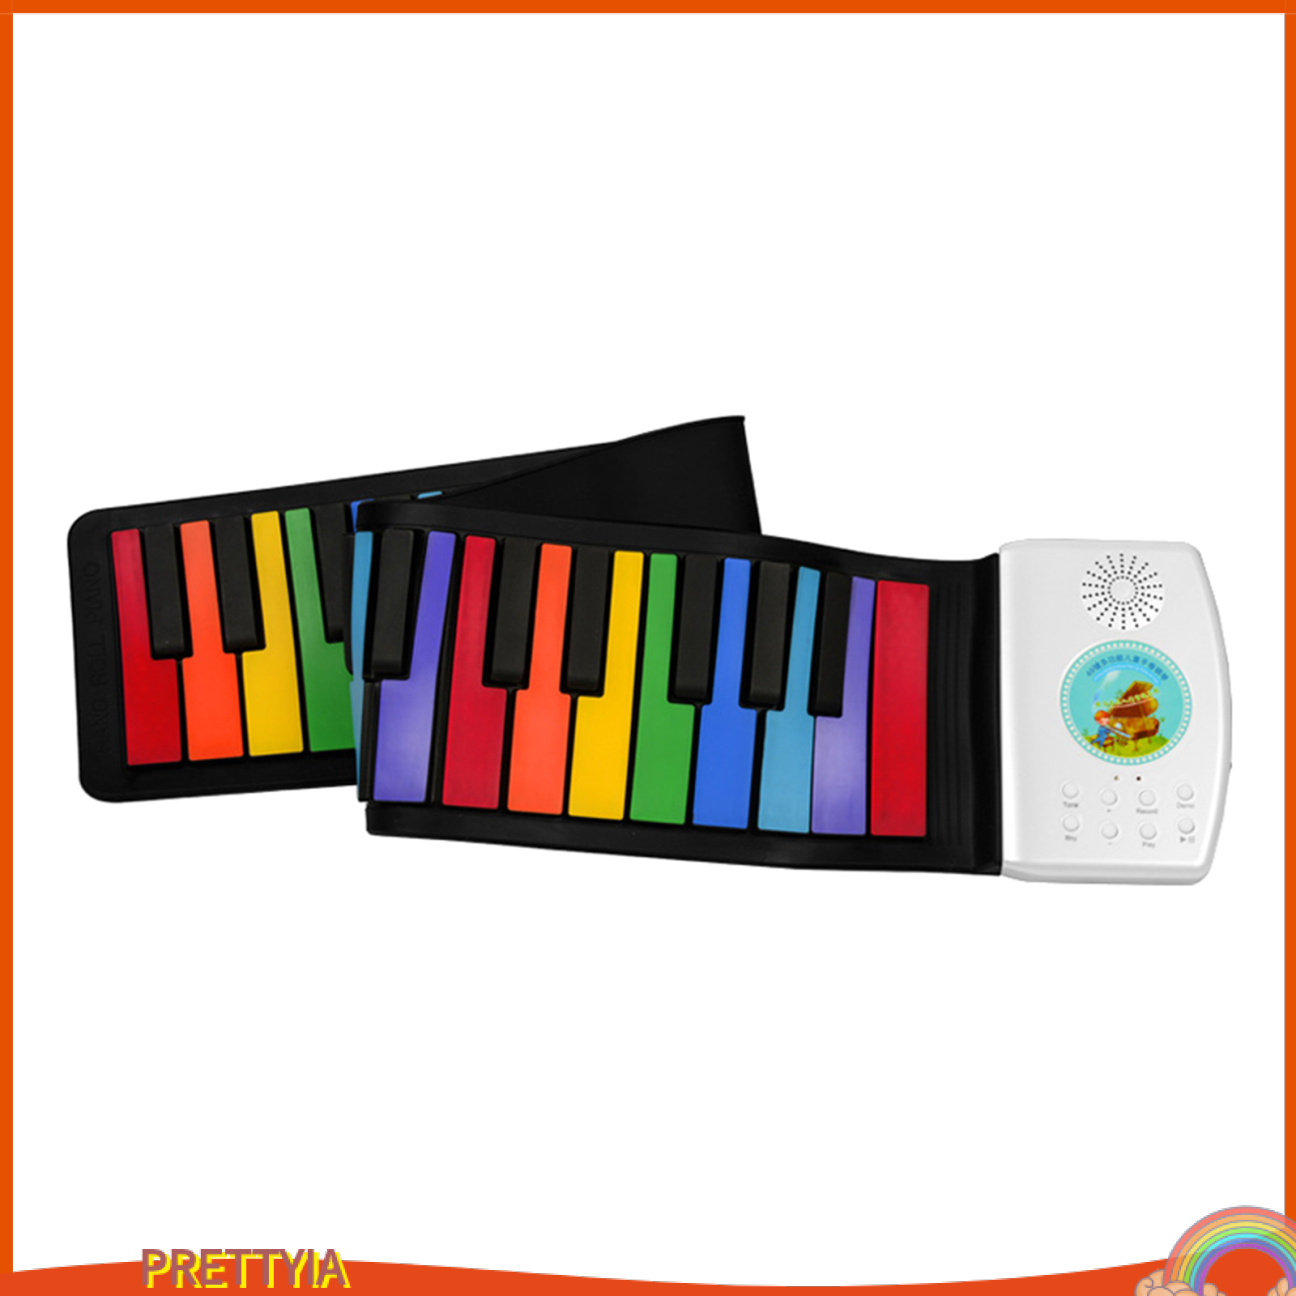 [PRETTYIA]Roll Up Piano Electric Digital Roll Up Keyboard Piano Gifts